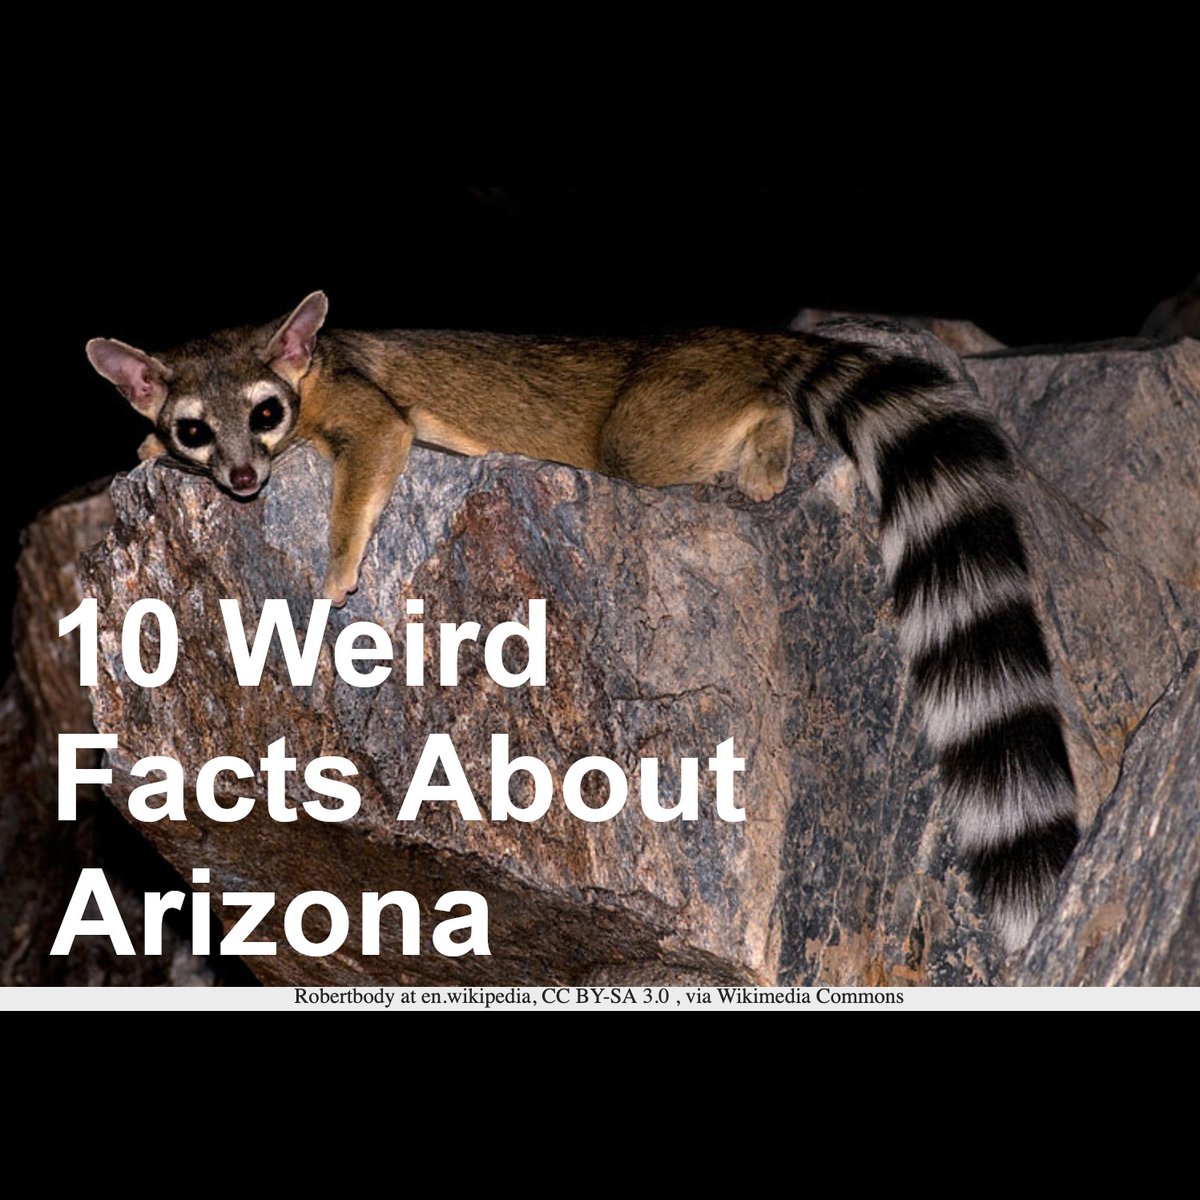 Discover 10 weird facts about Arizona in the cliptext section at freewriterstools.com/arizona (#Arizona, #Phoenix, #PhoenixArizona, #Tucson, #TucsonArizona, #ArizonaDesert, #ringTailCat, #SonoranDesertToad, #desert, #dryClimate, #SunCity, #ArizonaState)